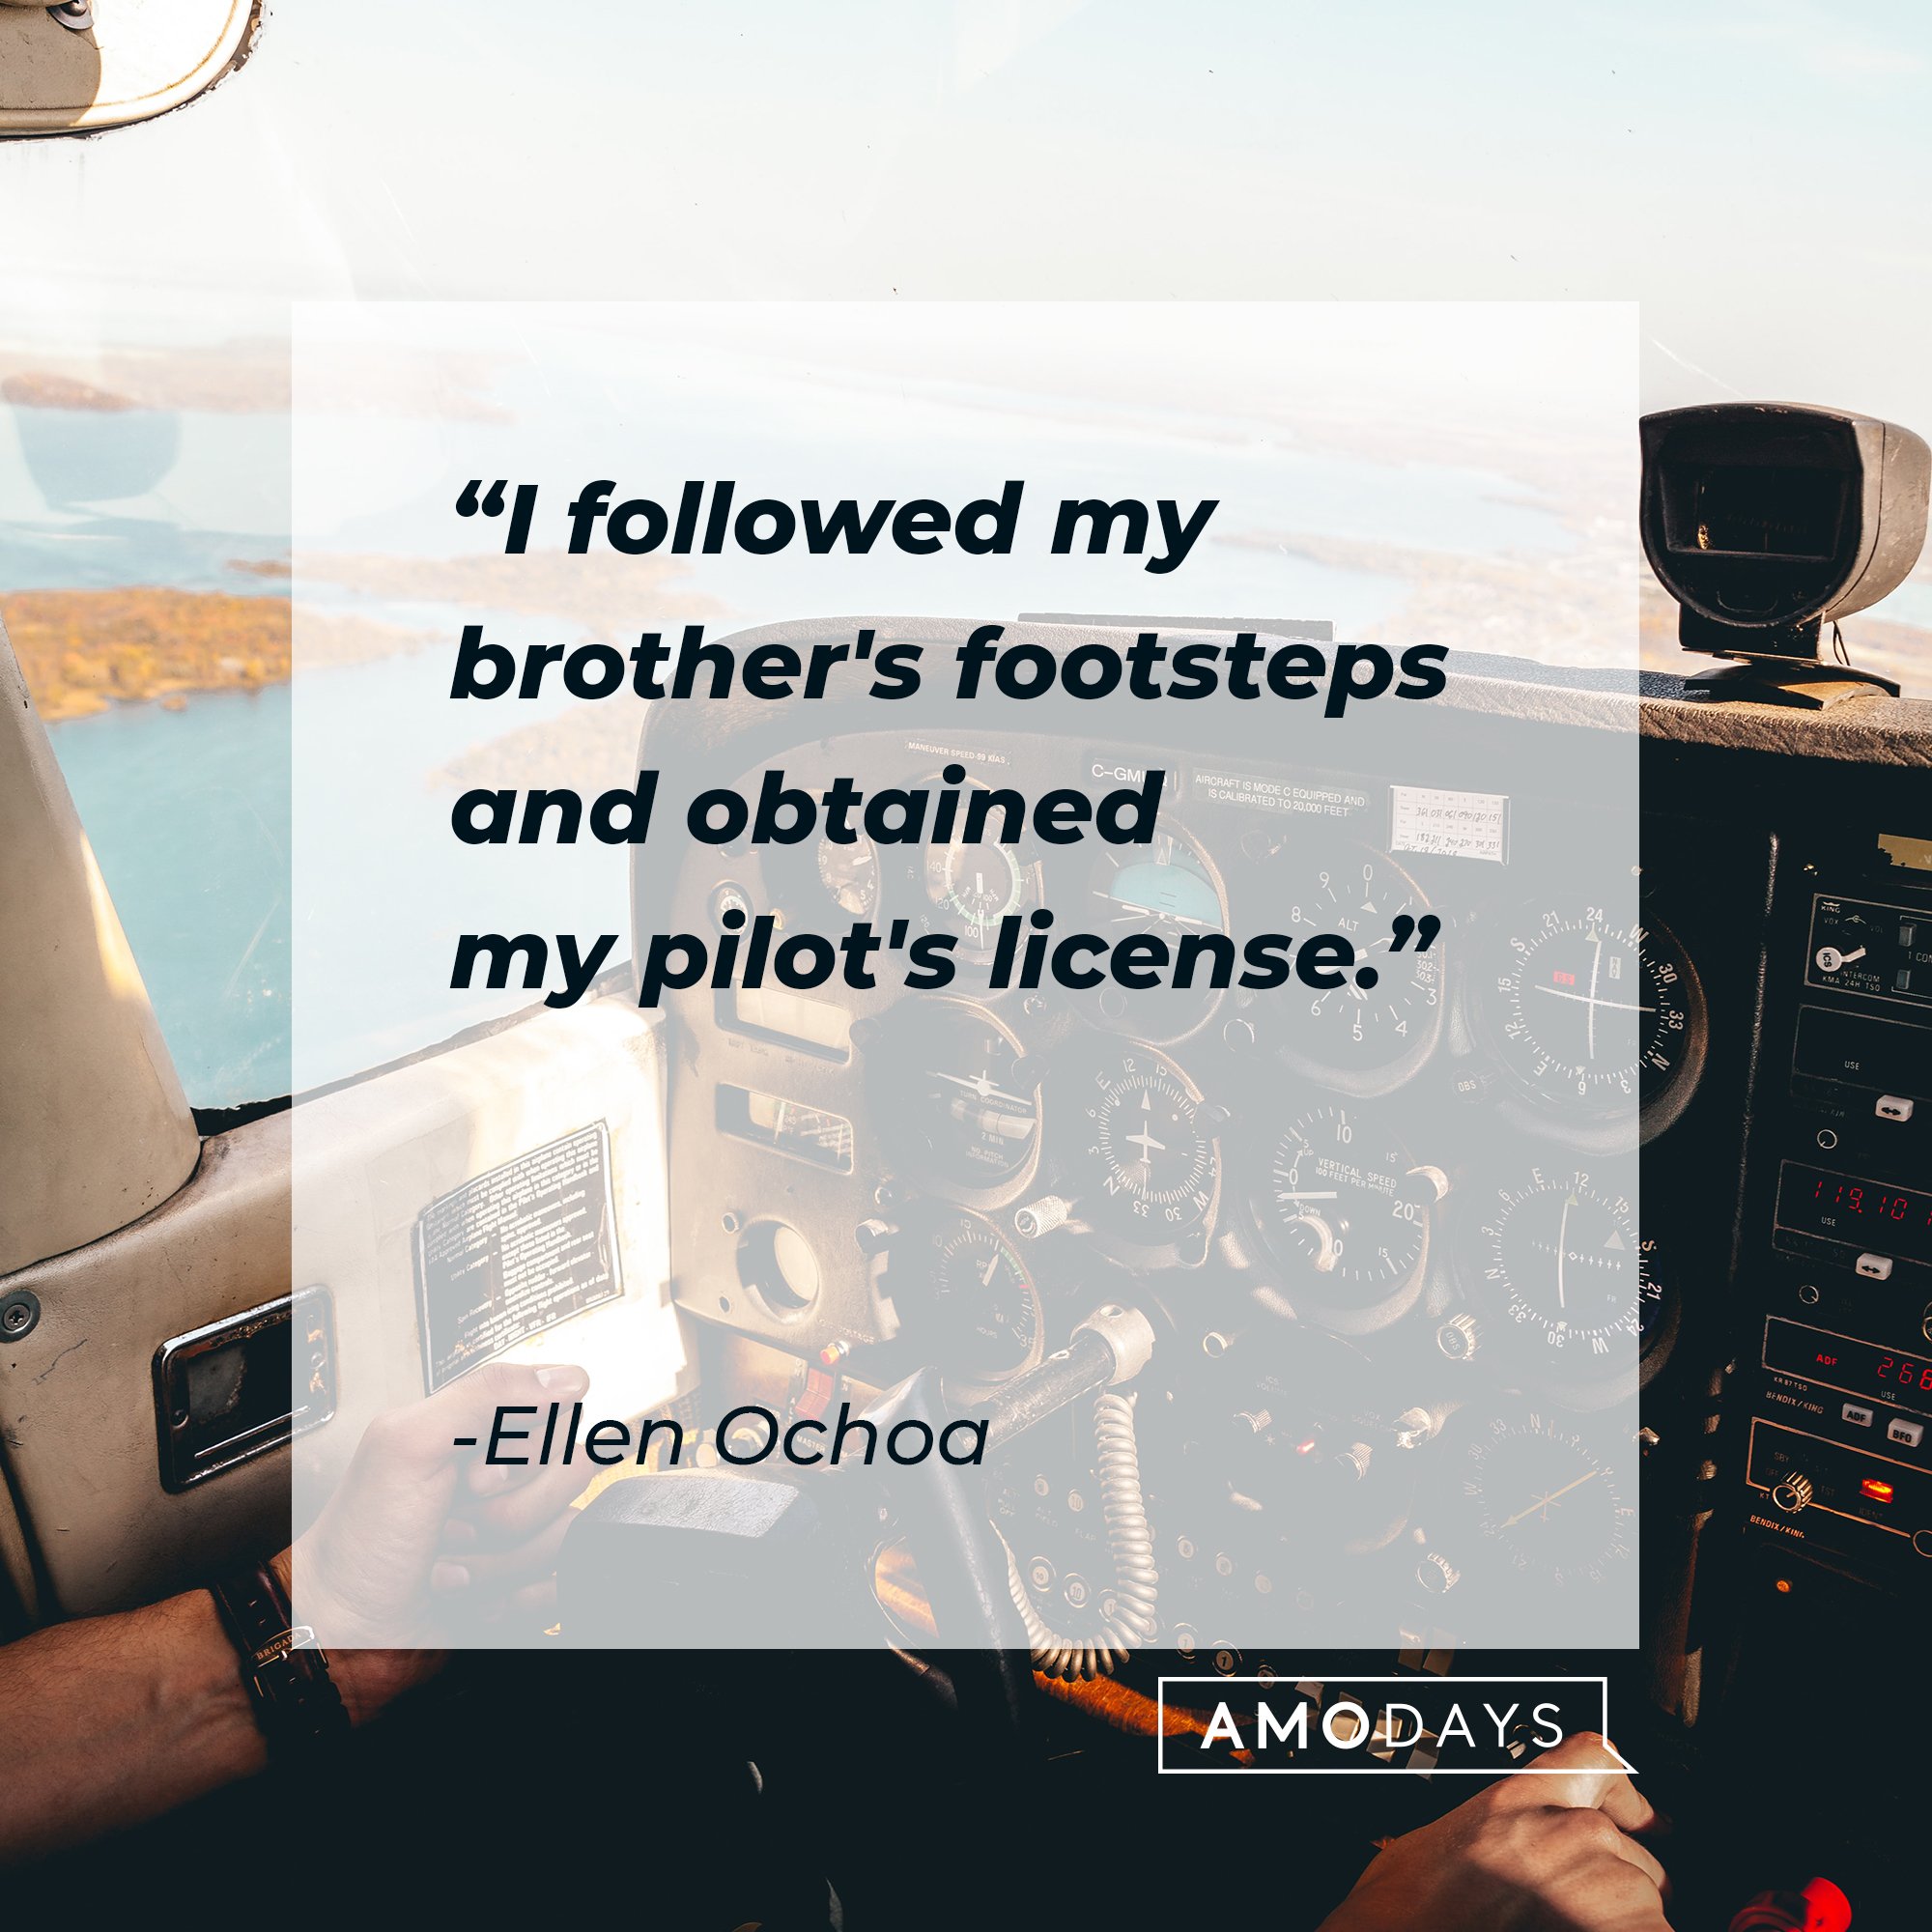  Ellen Ochoa's quote: "I followed my brother's footsteps and obtained my pilot's license." | Image: AmoDays